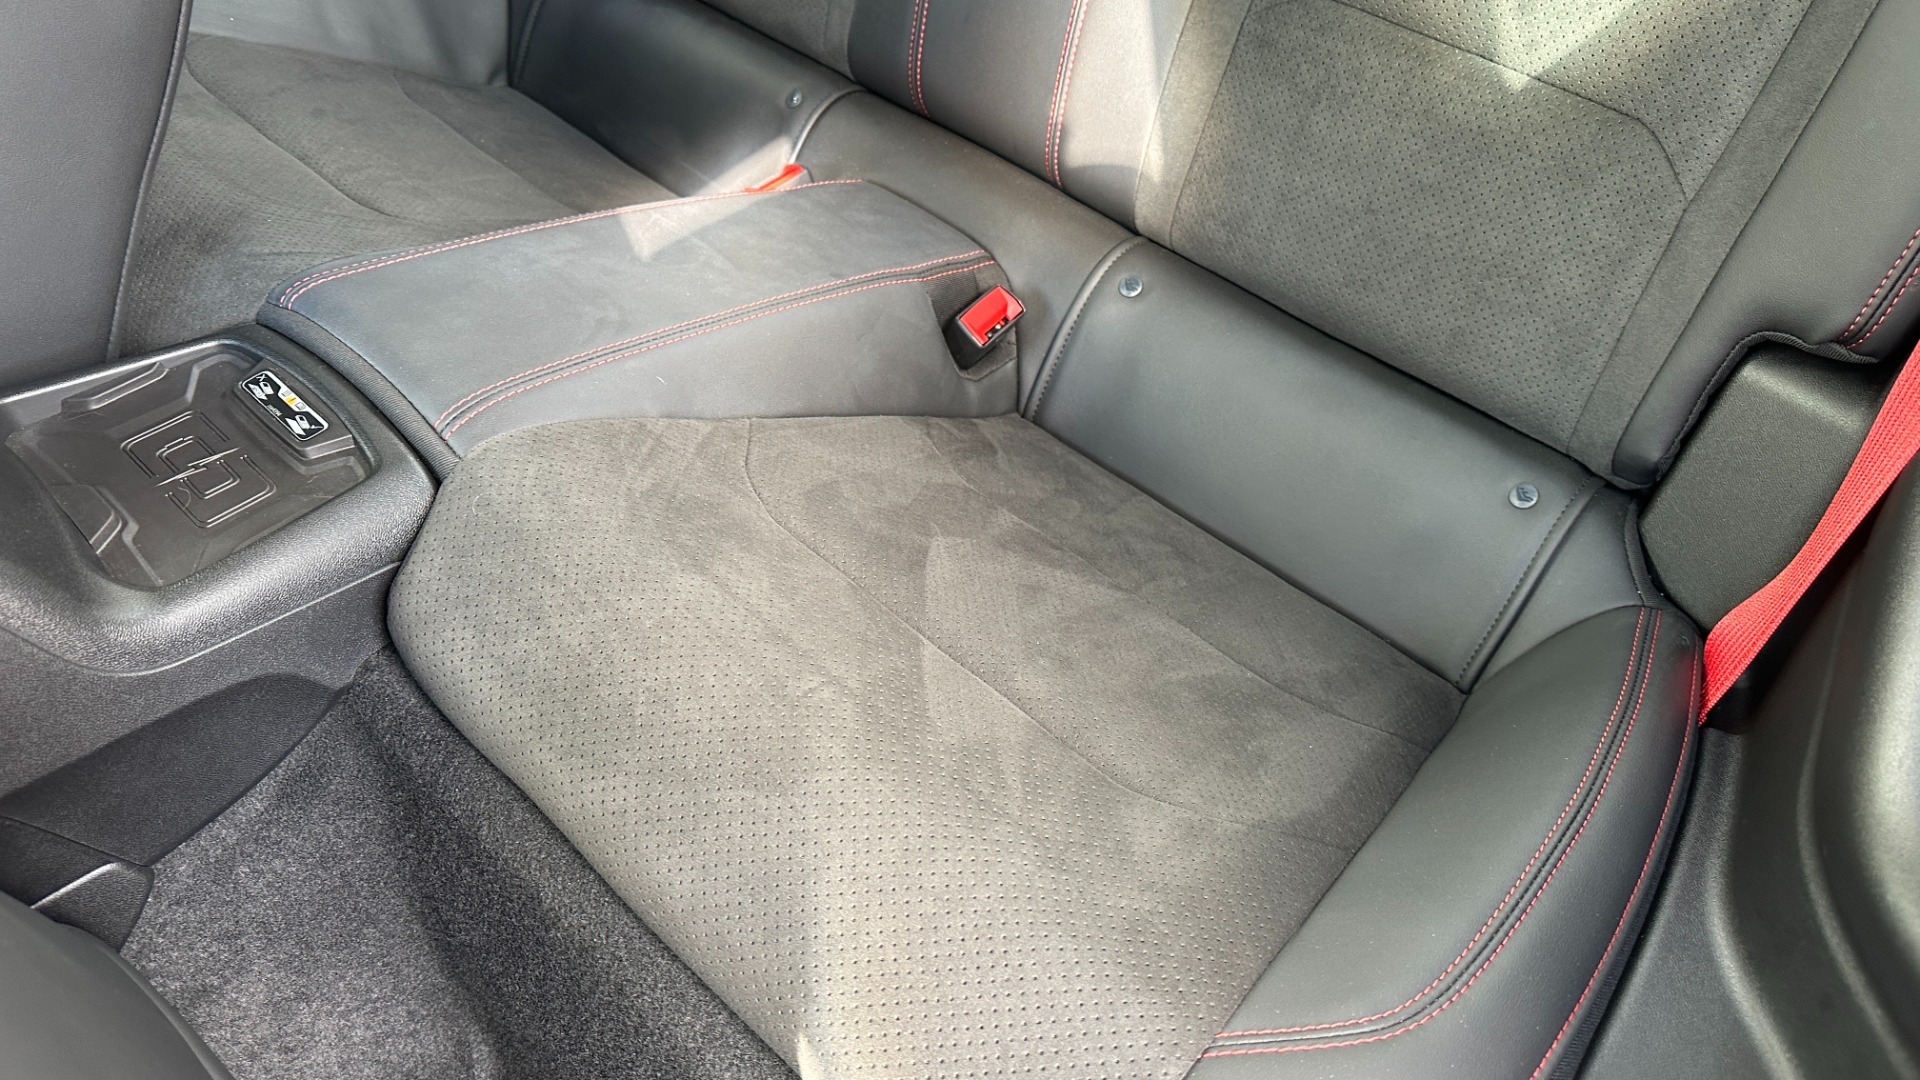 Used 2020 Chevrolet Camaro ZL1 / SUPERCHARGED / CARBON FIBER / RED SEAT BELTS / RECARO SEATING / 10SPD for sale $66,995 at Formula Imports in Charlotte NC 28227 18